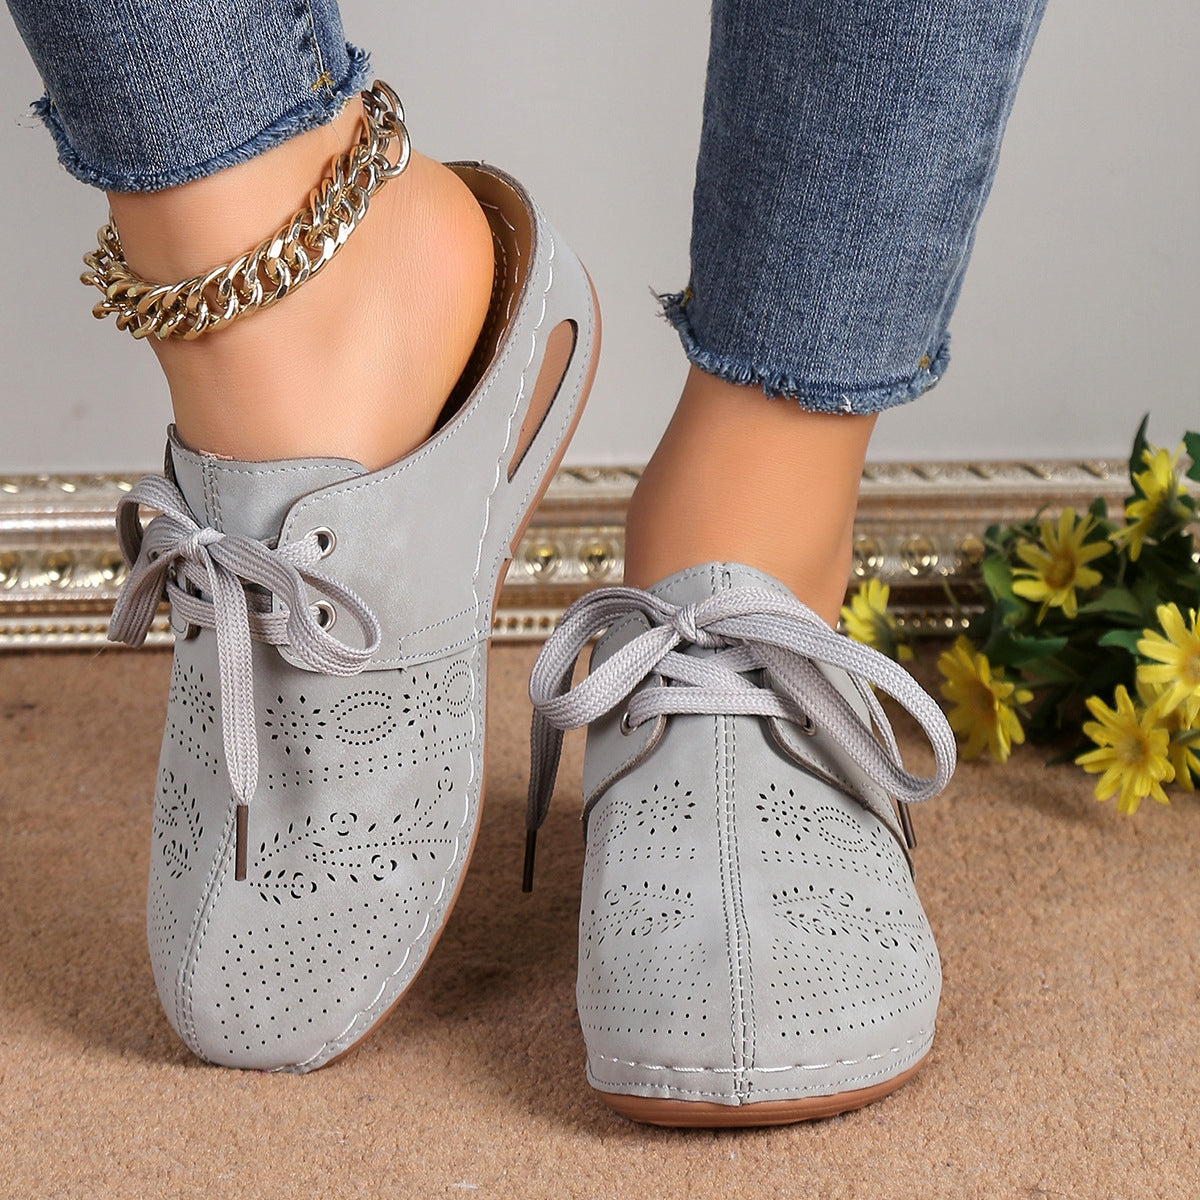 Lace-Up Round Toe Wedge Sandals Gray